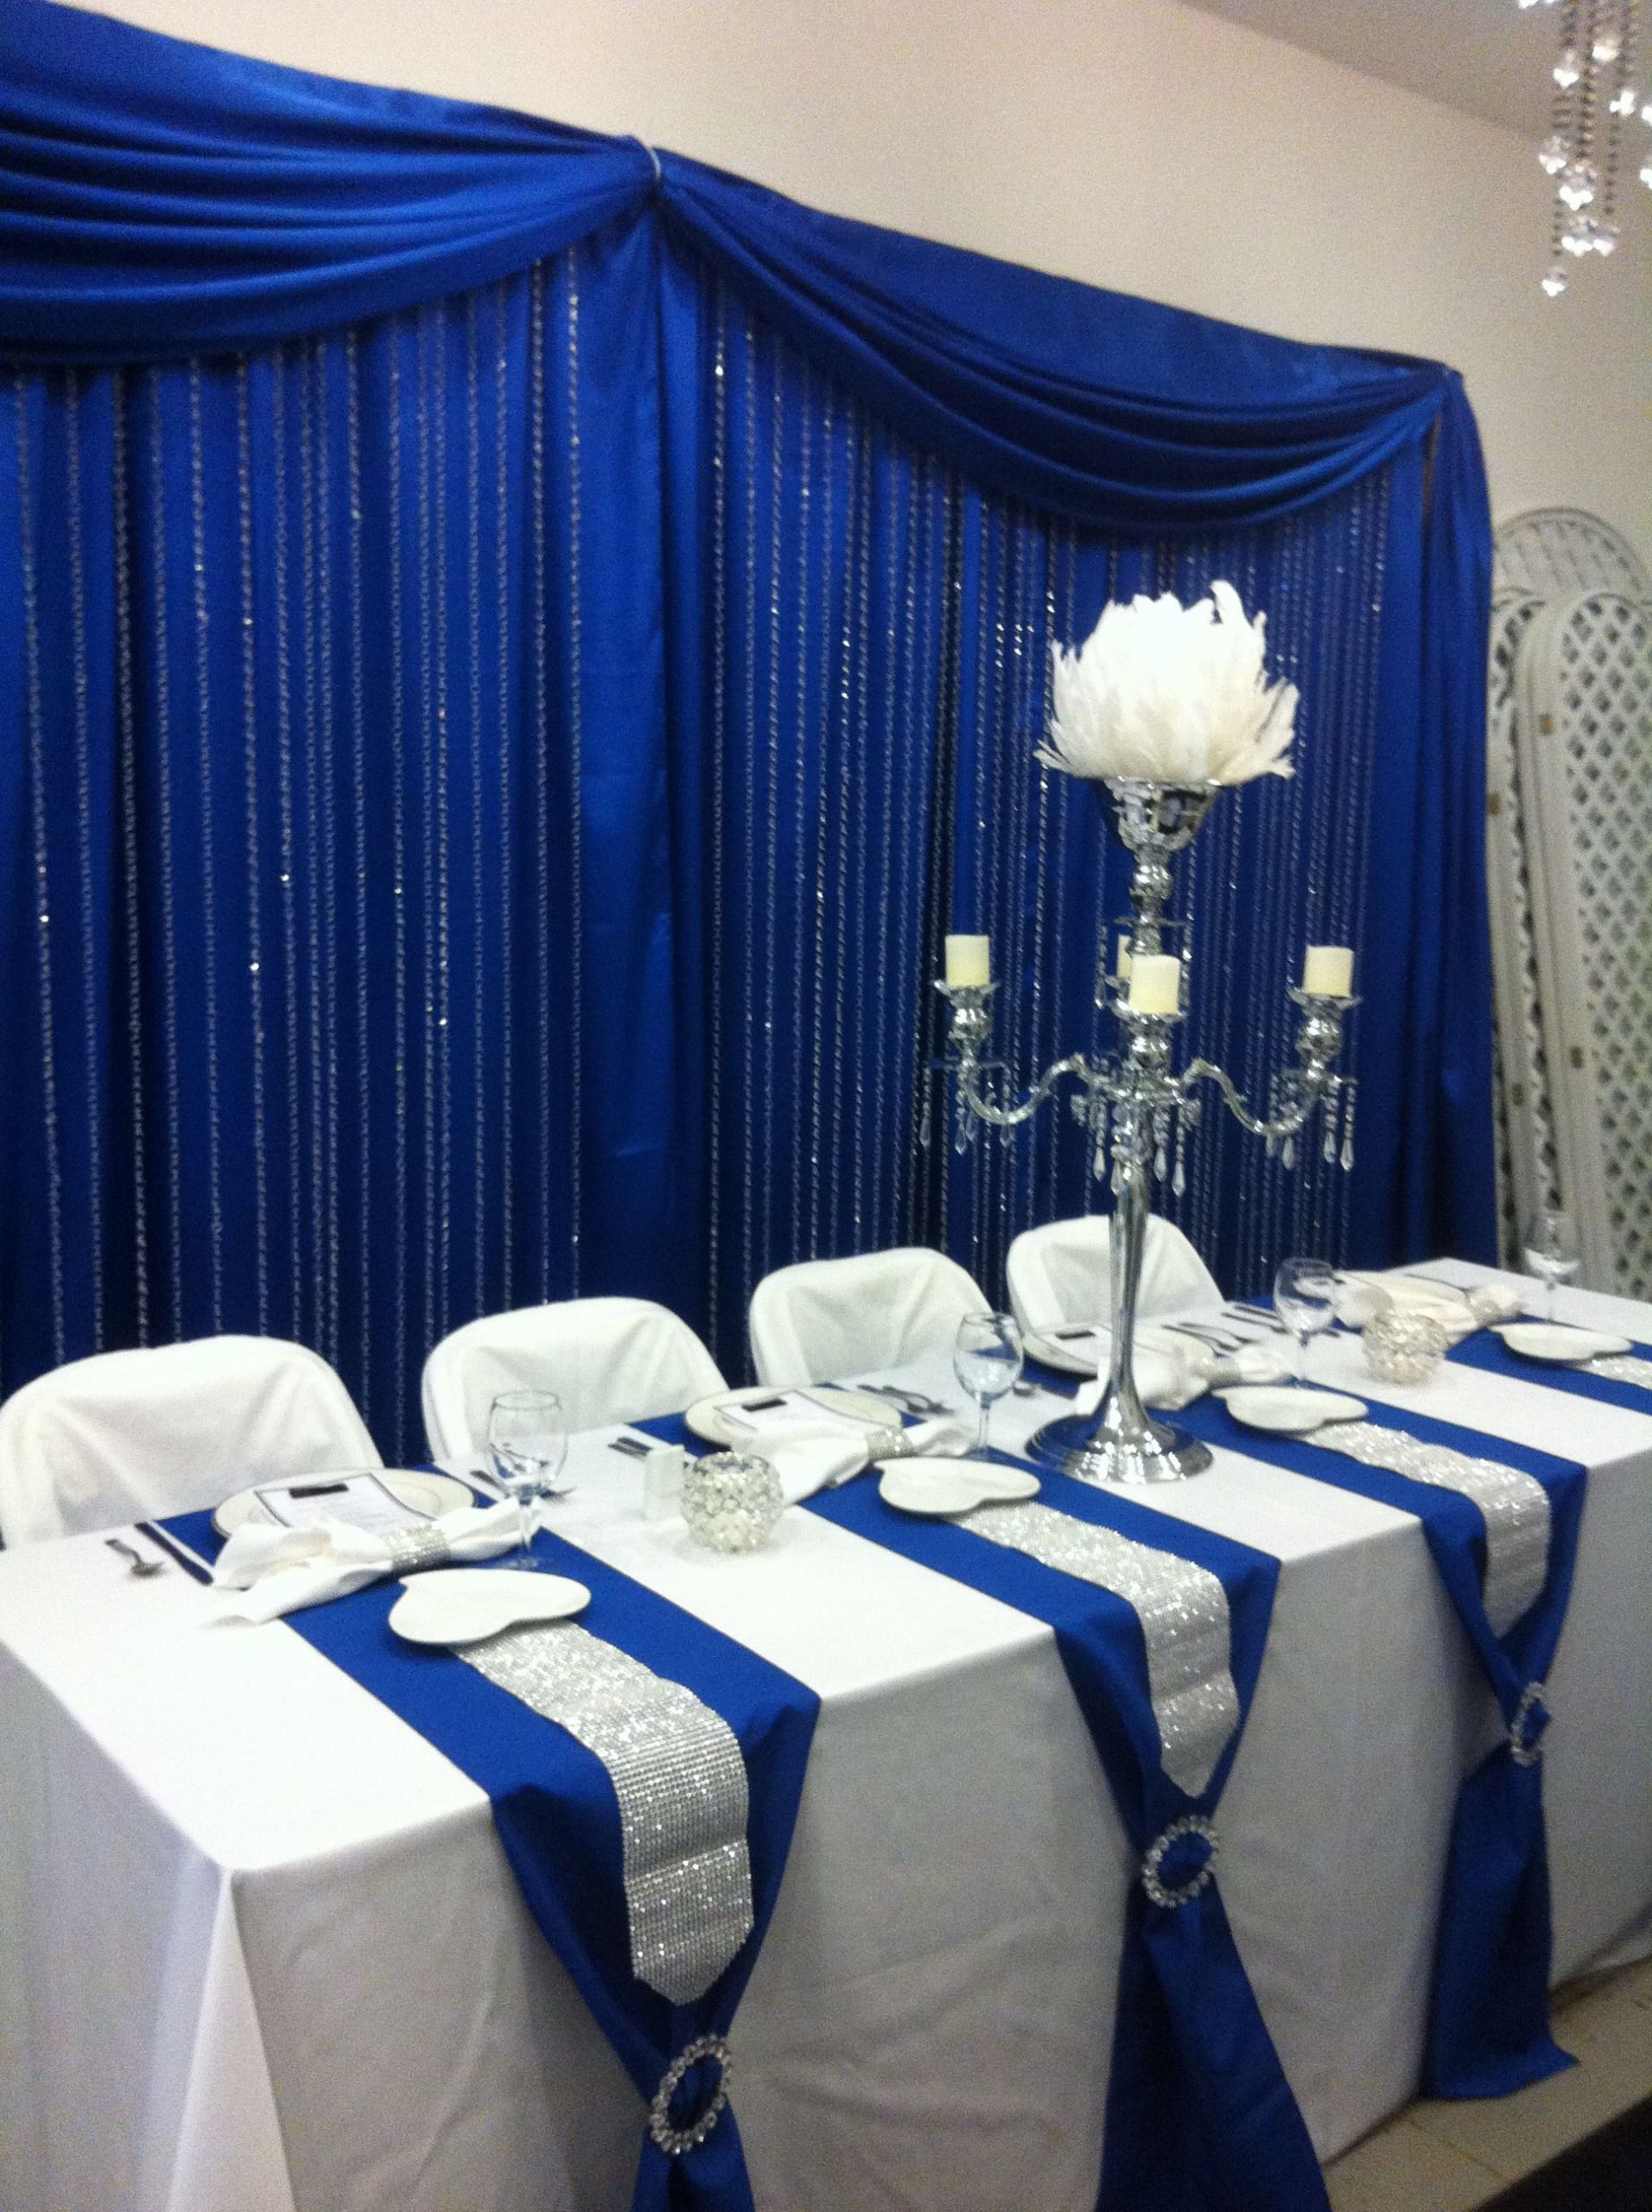 Royal Blue And Silver Wedding Decorations
 Head table with royal blue back drop and crystal step